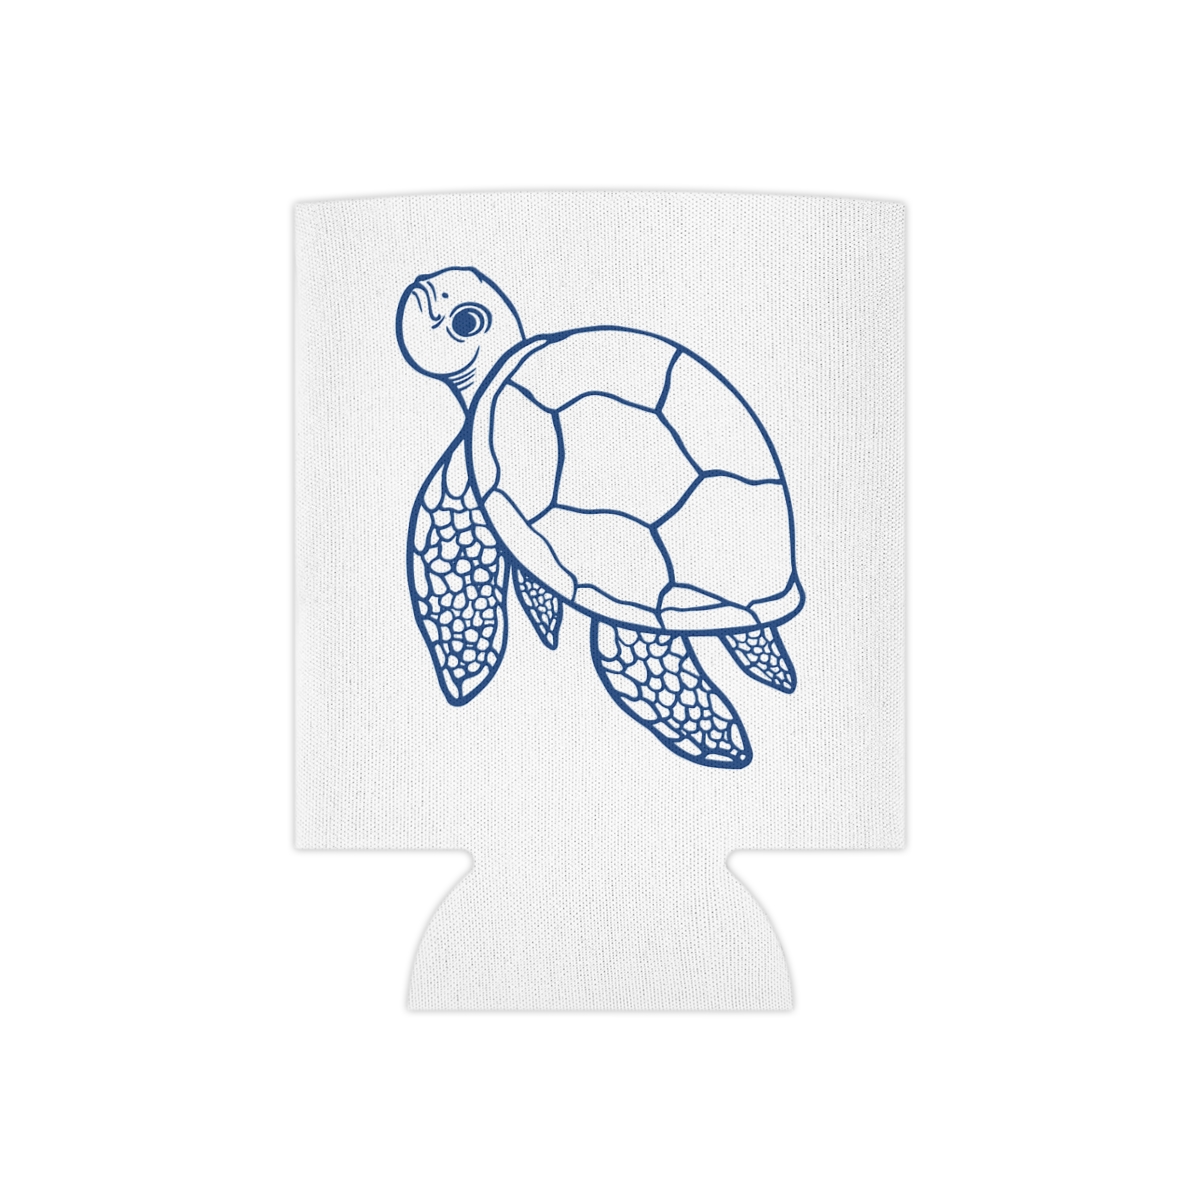 Seas the Day Sea Turtle Can Koozie - White product thumbnail image